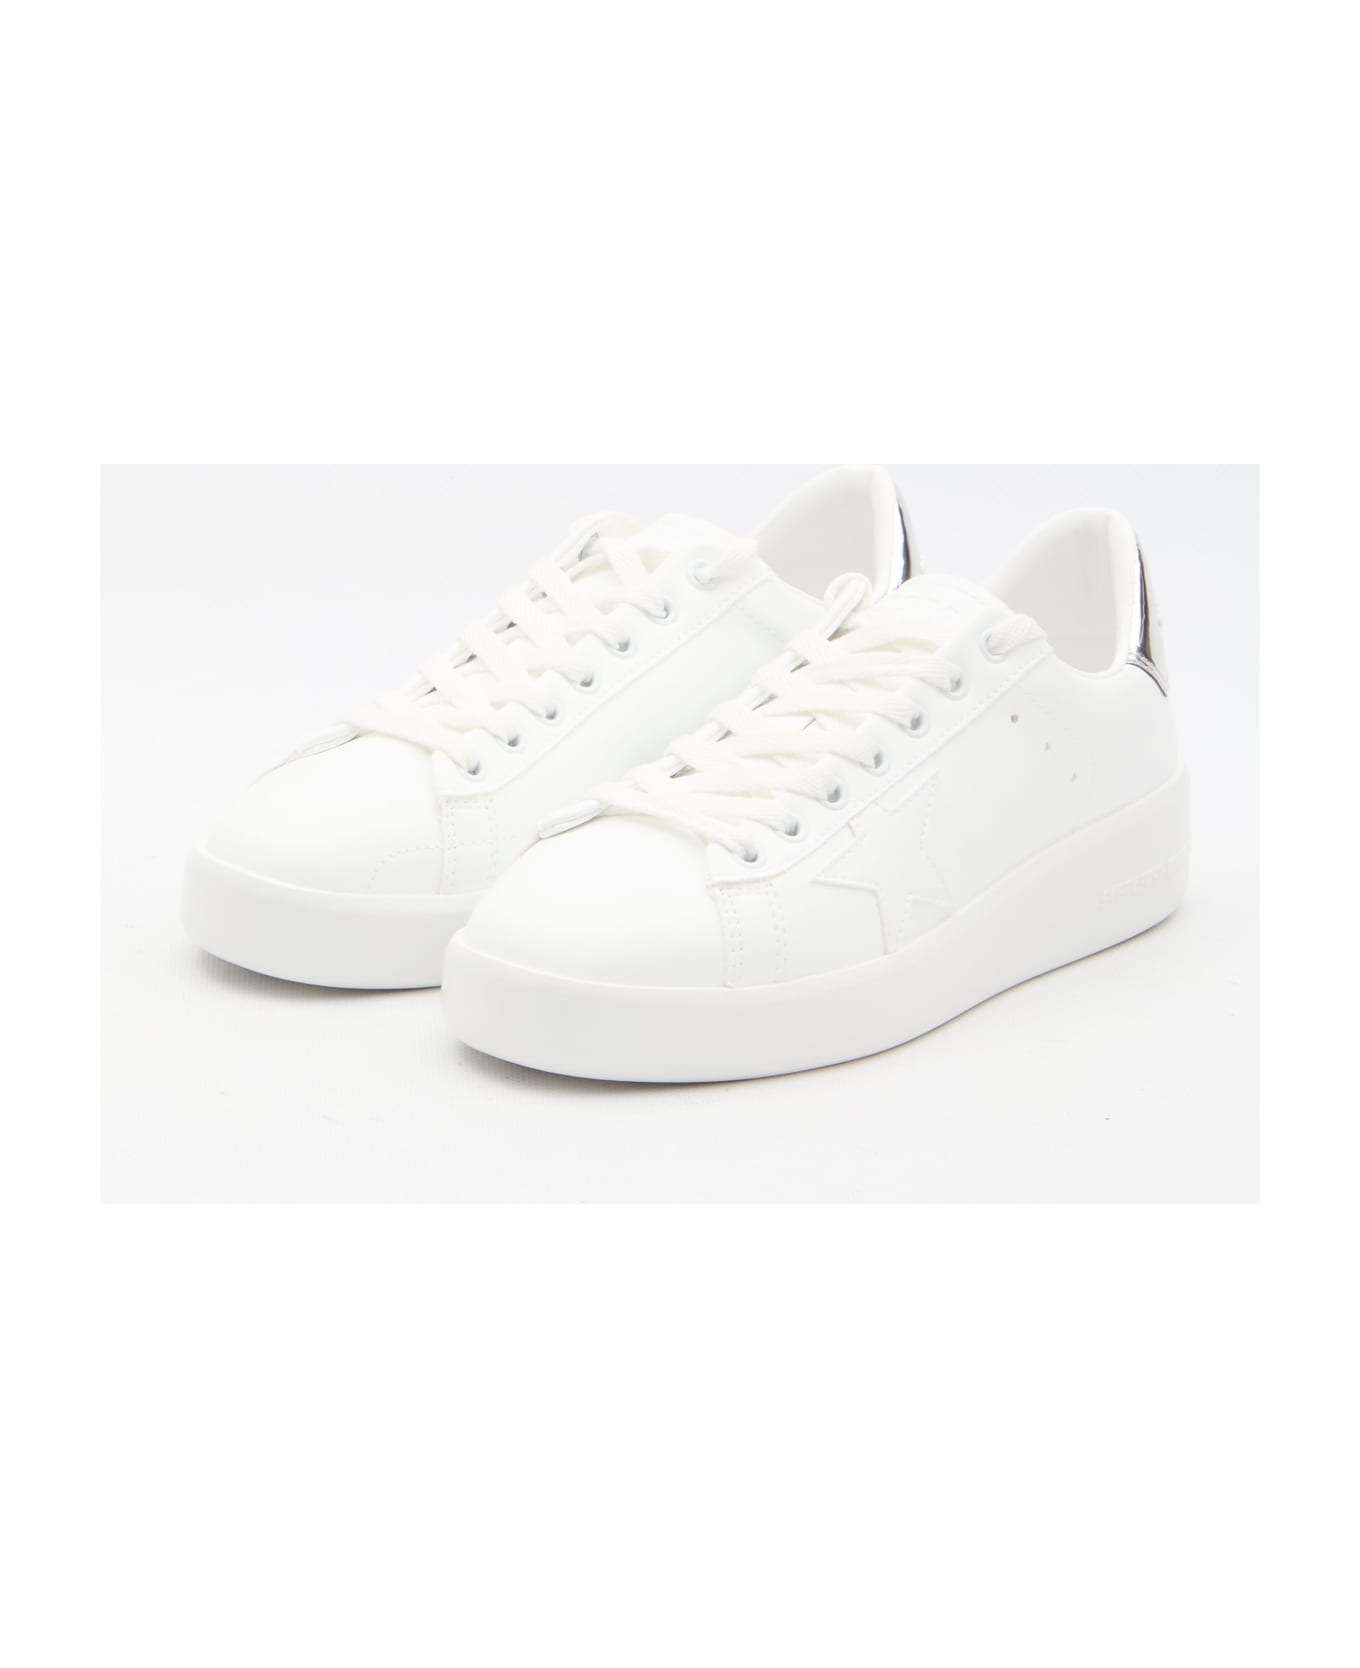 Golden Goose Pure New Sneakers - WHITE/SILVER